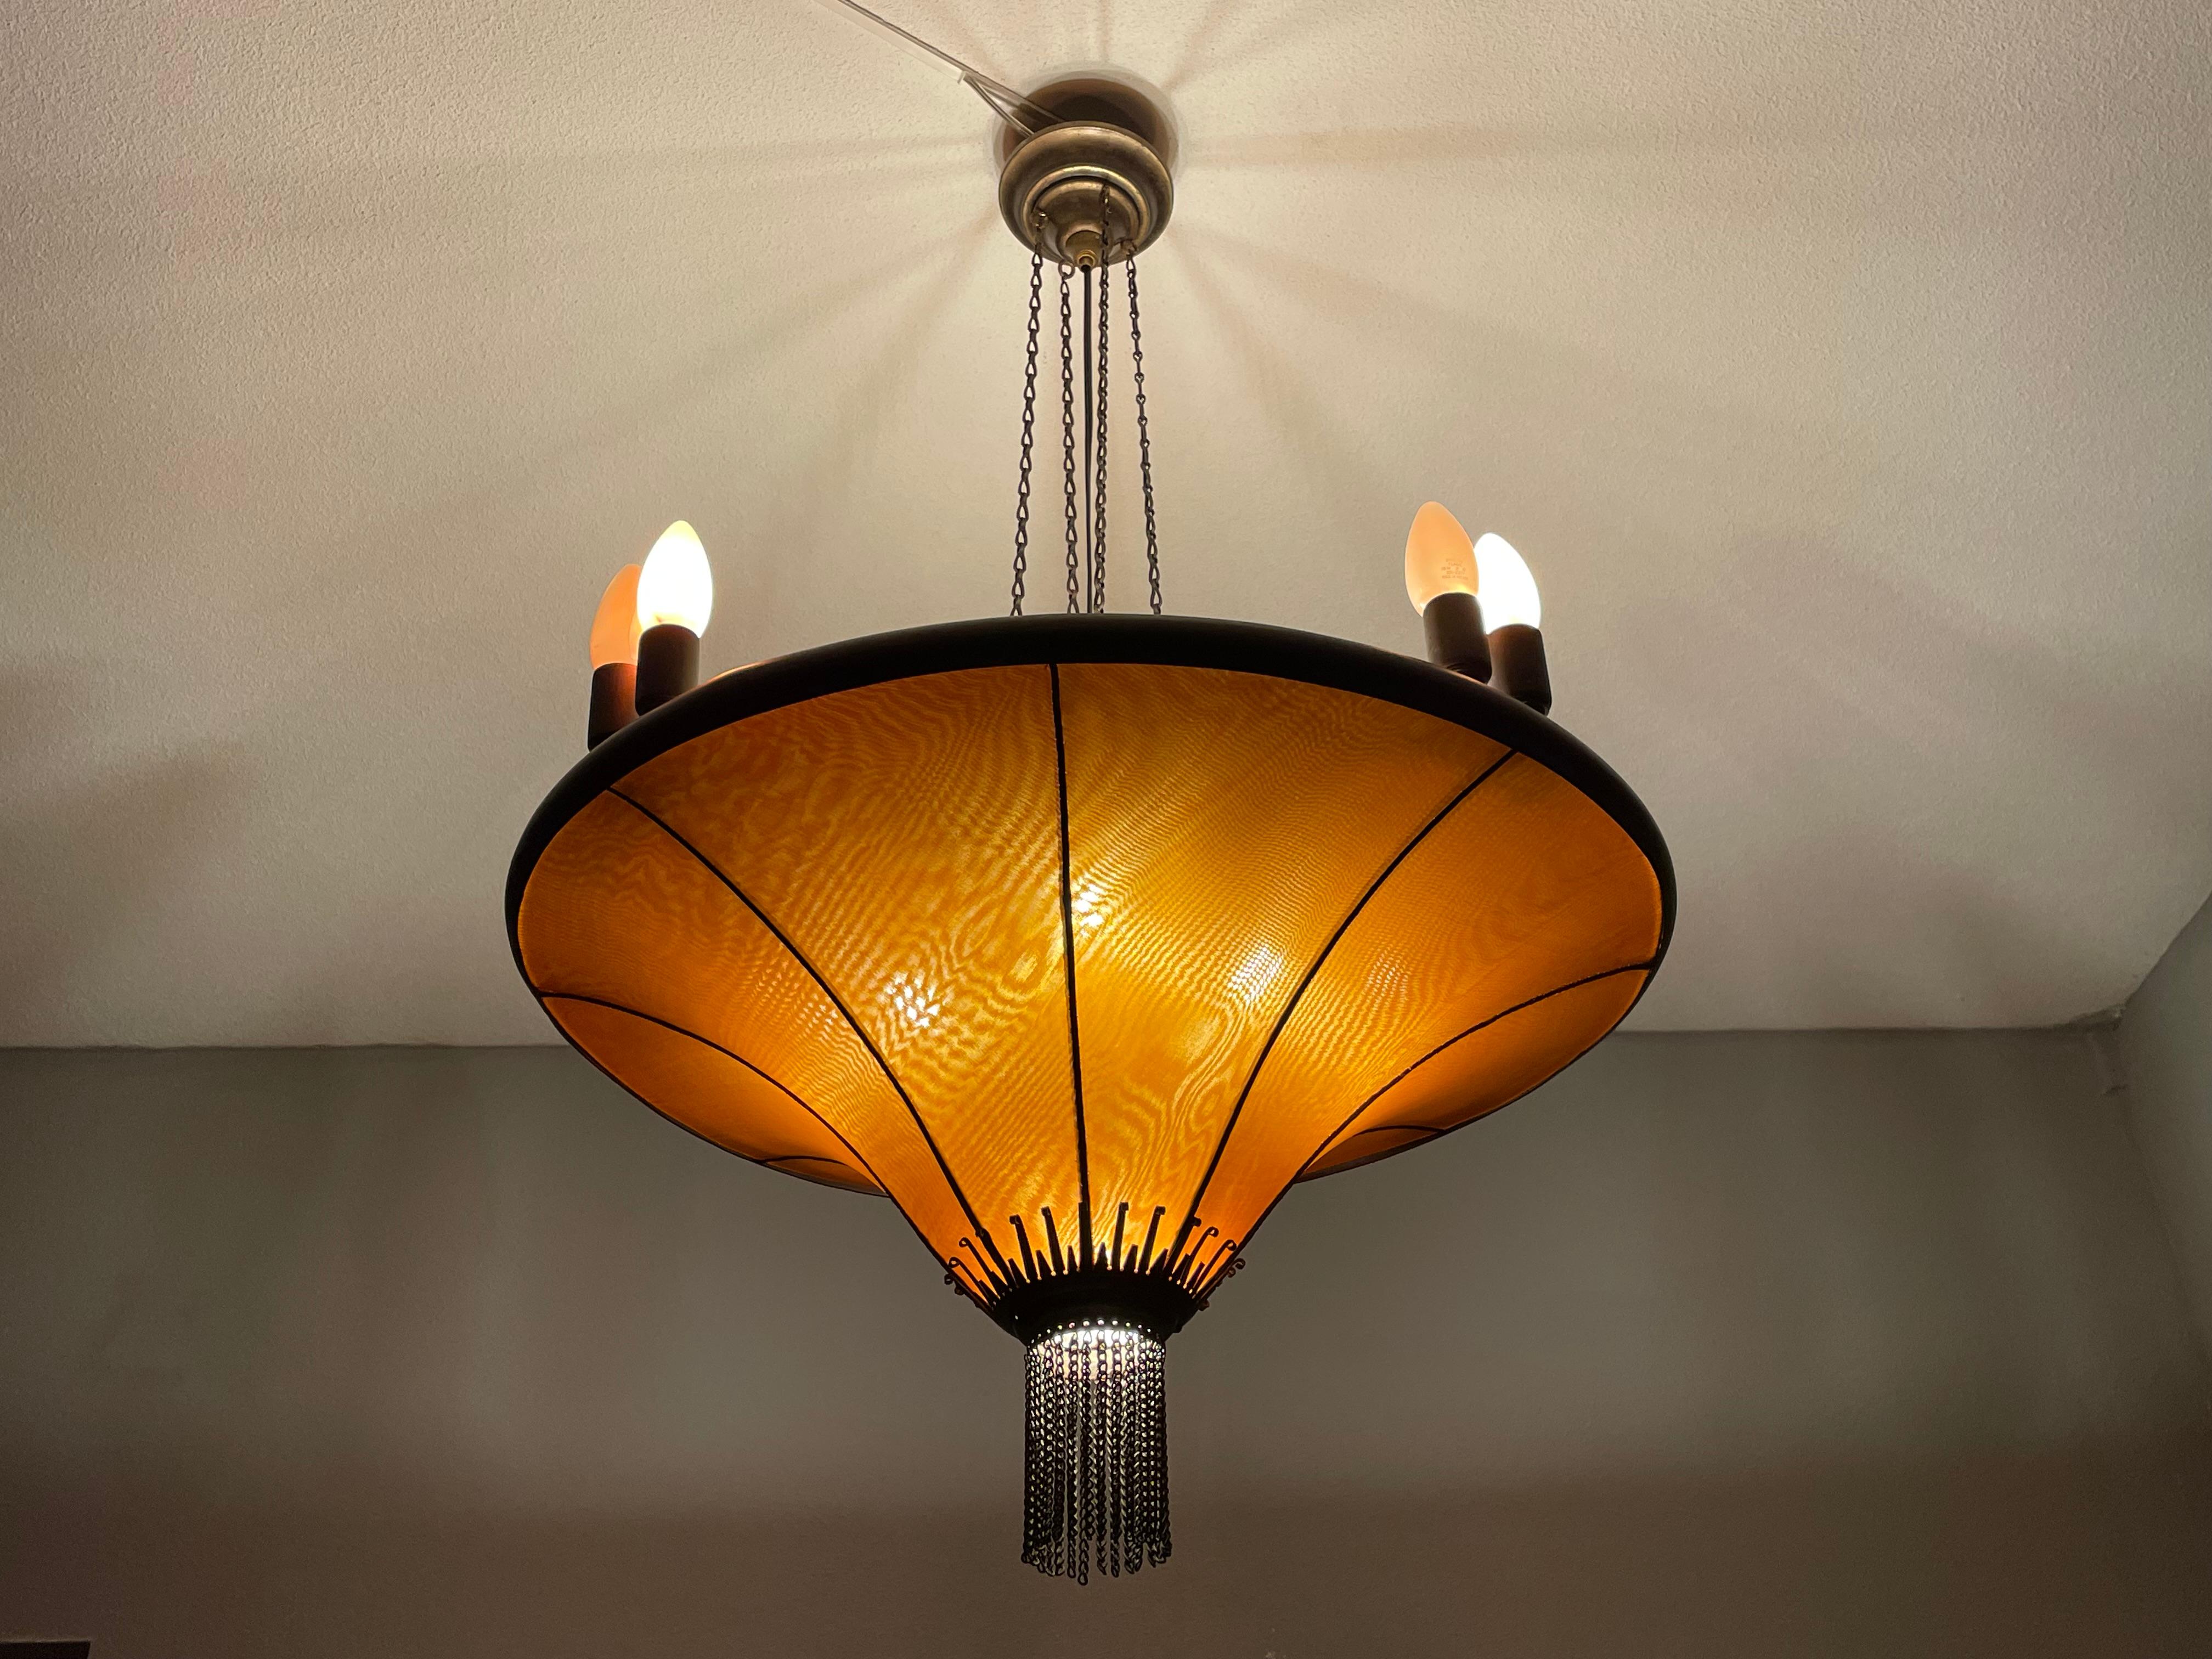 This striking and rare, 13-light chandelier has an amazing look and feel.

If you live or work in an Arts and Crafts or in an Art Deco building/interior and you are looking for a matching fixture to grace your living or work space then this very